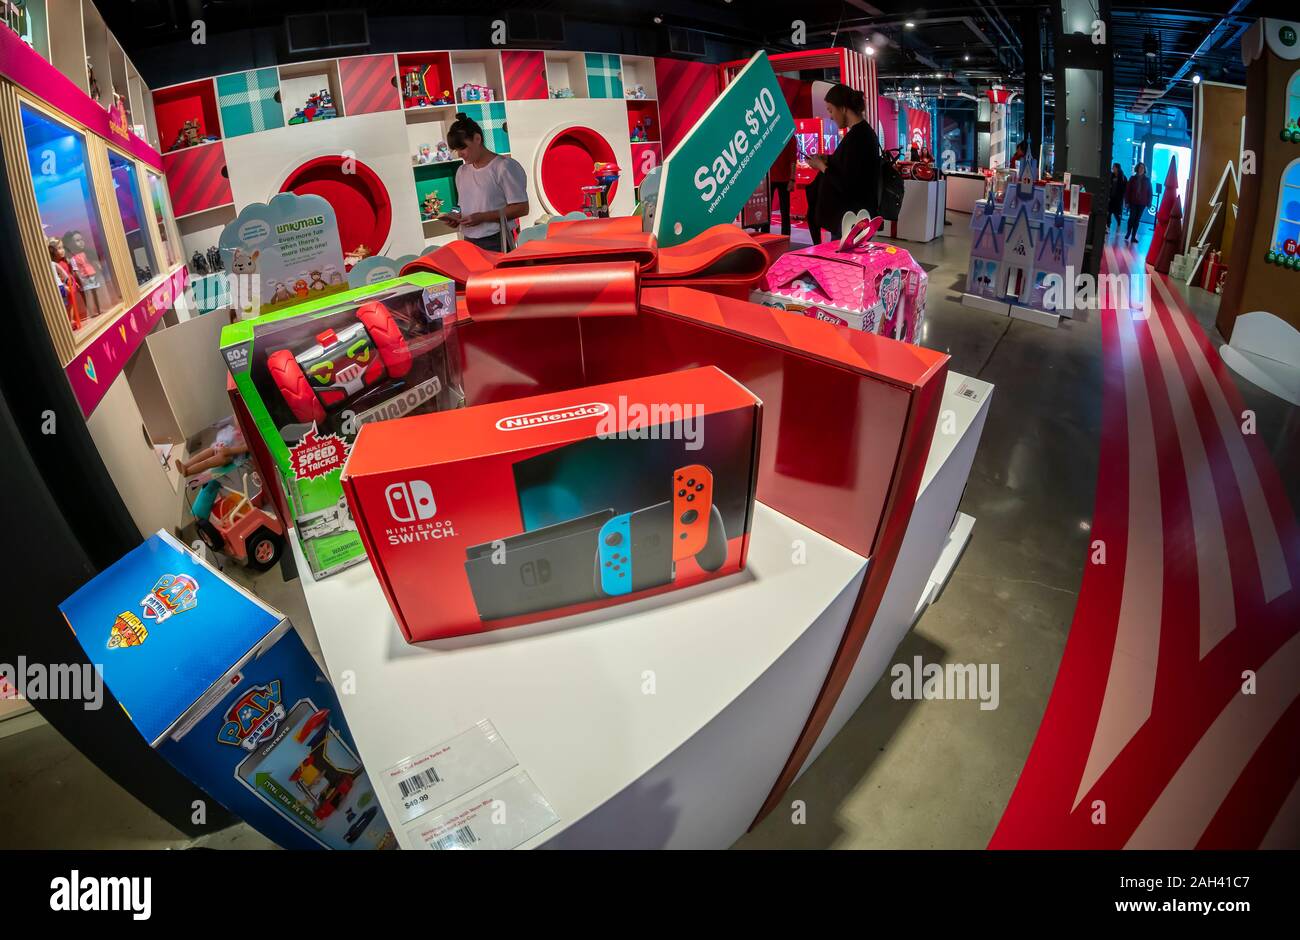 Nintendo Switch and other products on display at the Target "Wonderland!"  pop-up store in the Meatpacking District in New York on its grand opening  day, Friday, December 13, 2019. The pop-up, featuring